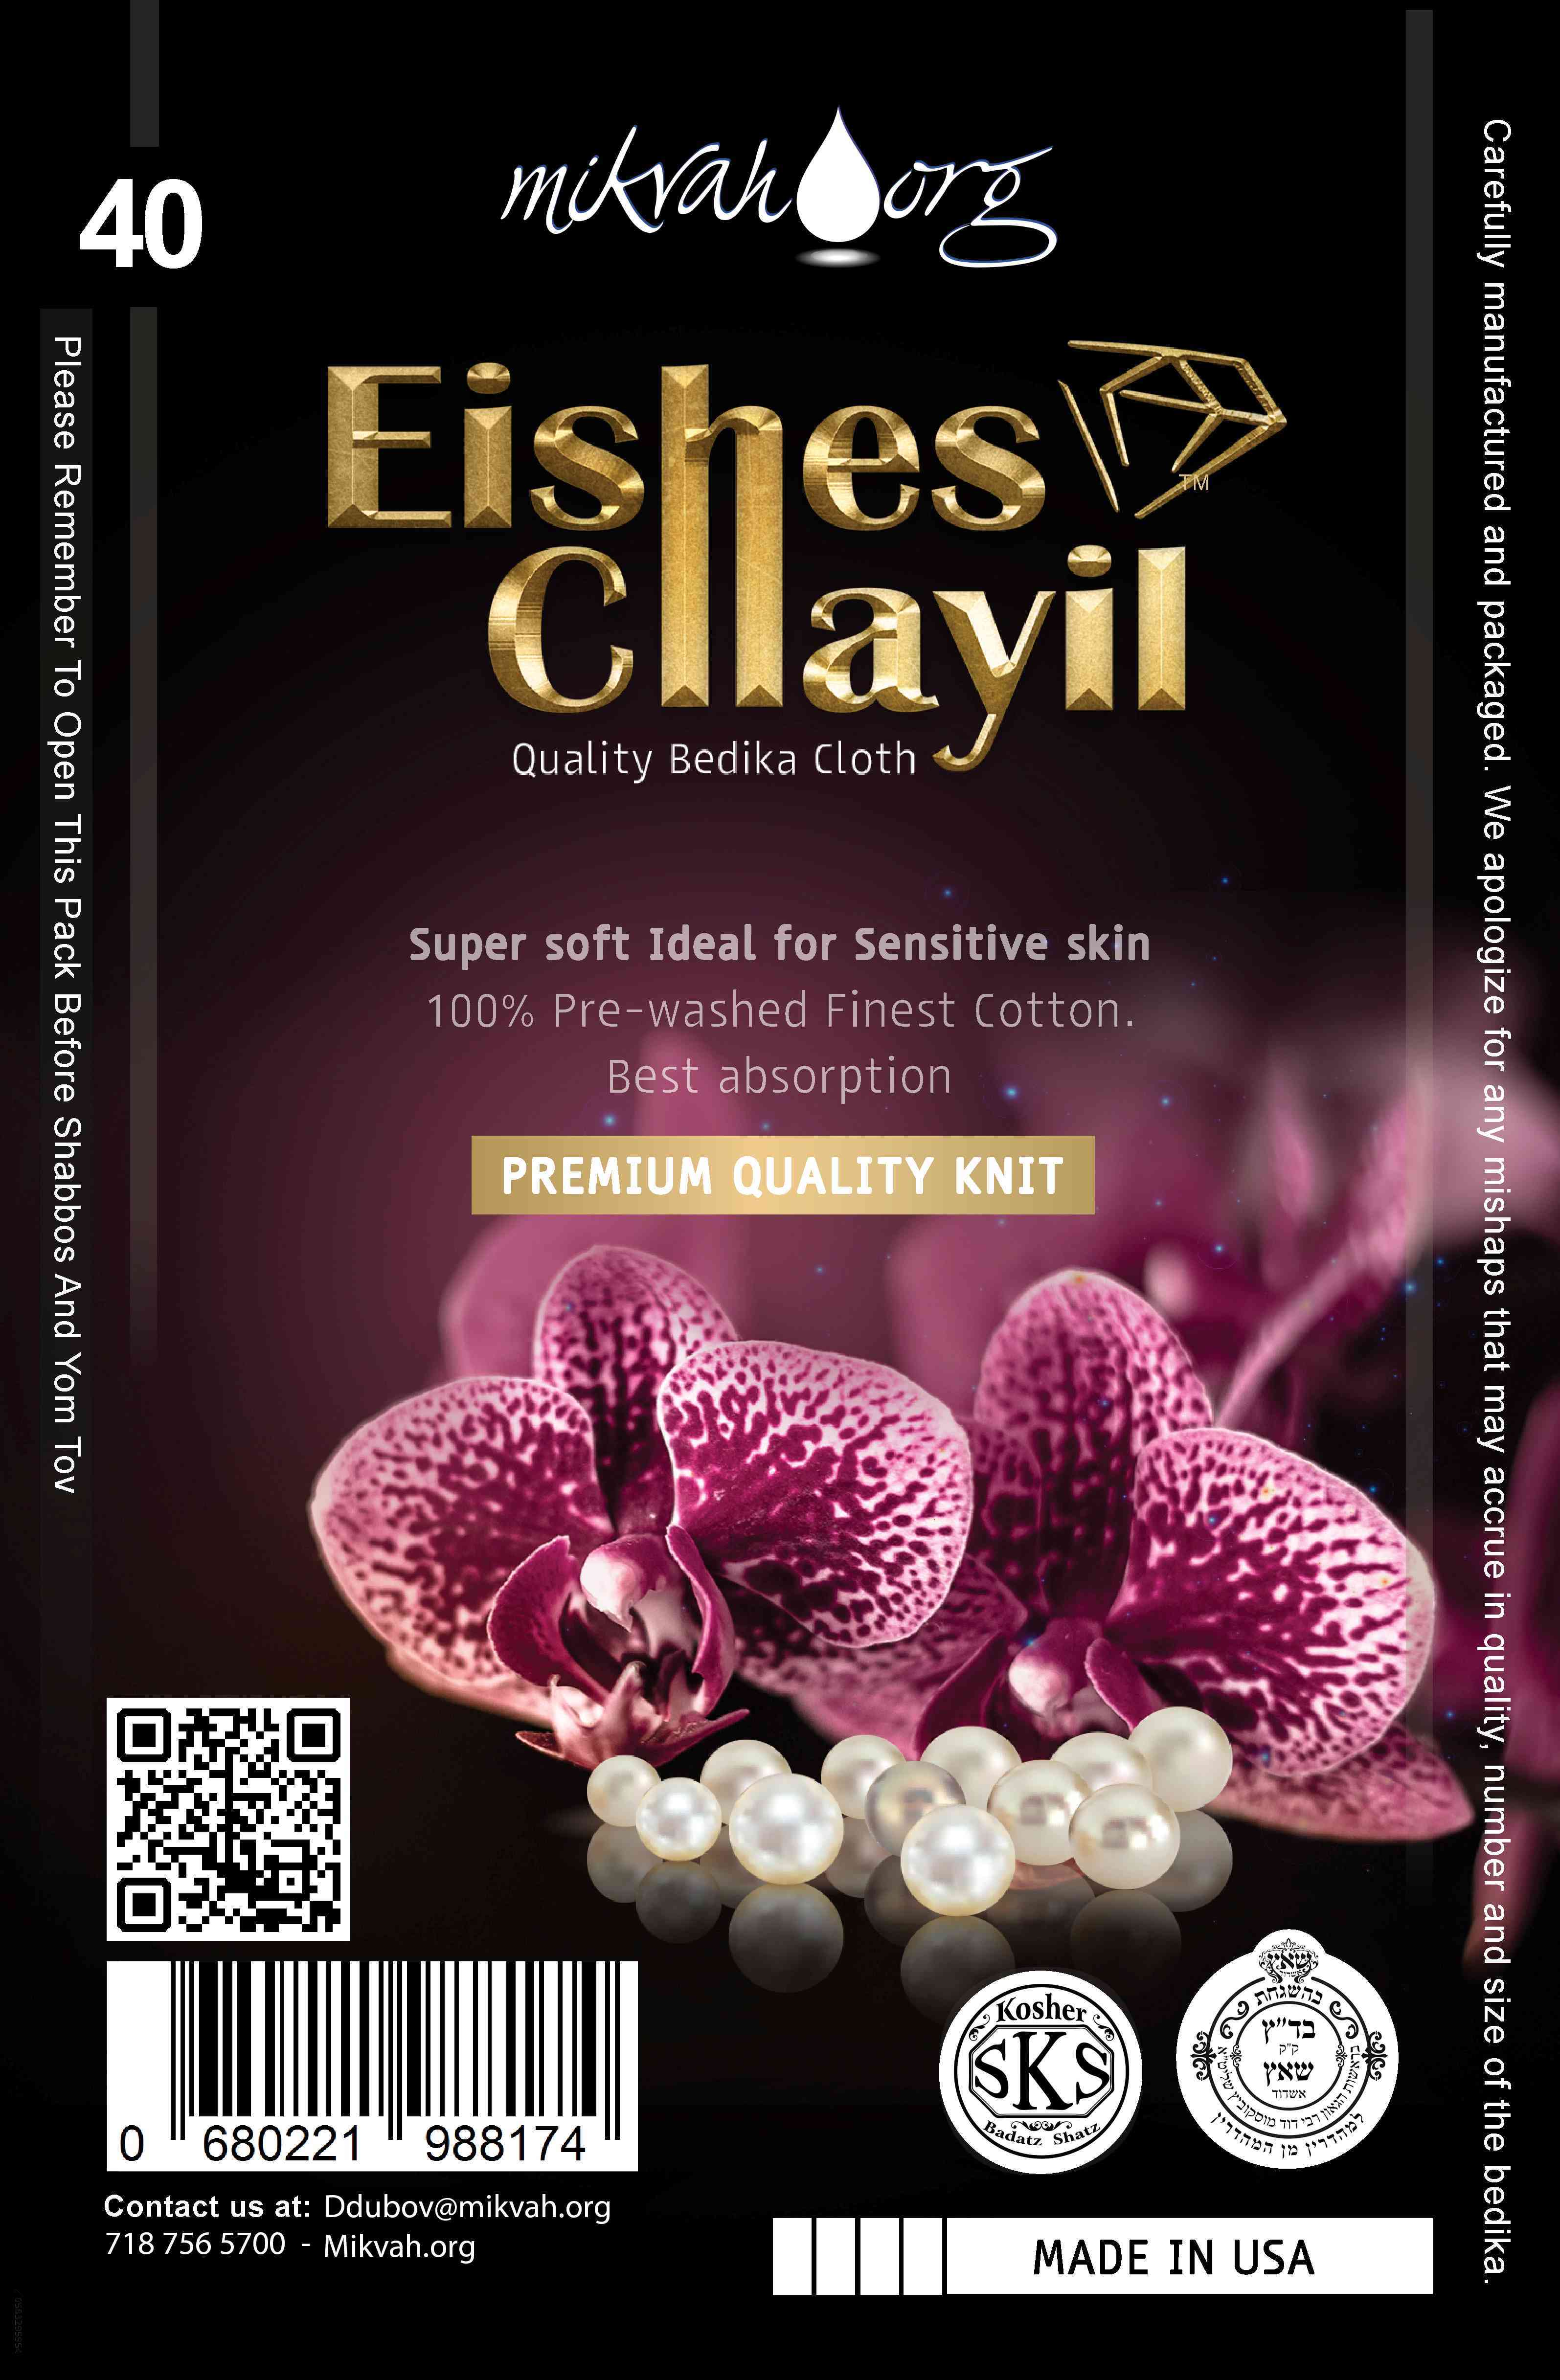 NEW! Eishes Chayil KNIT bedikah cloths in hygienically closed packaging